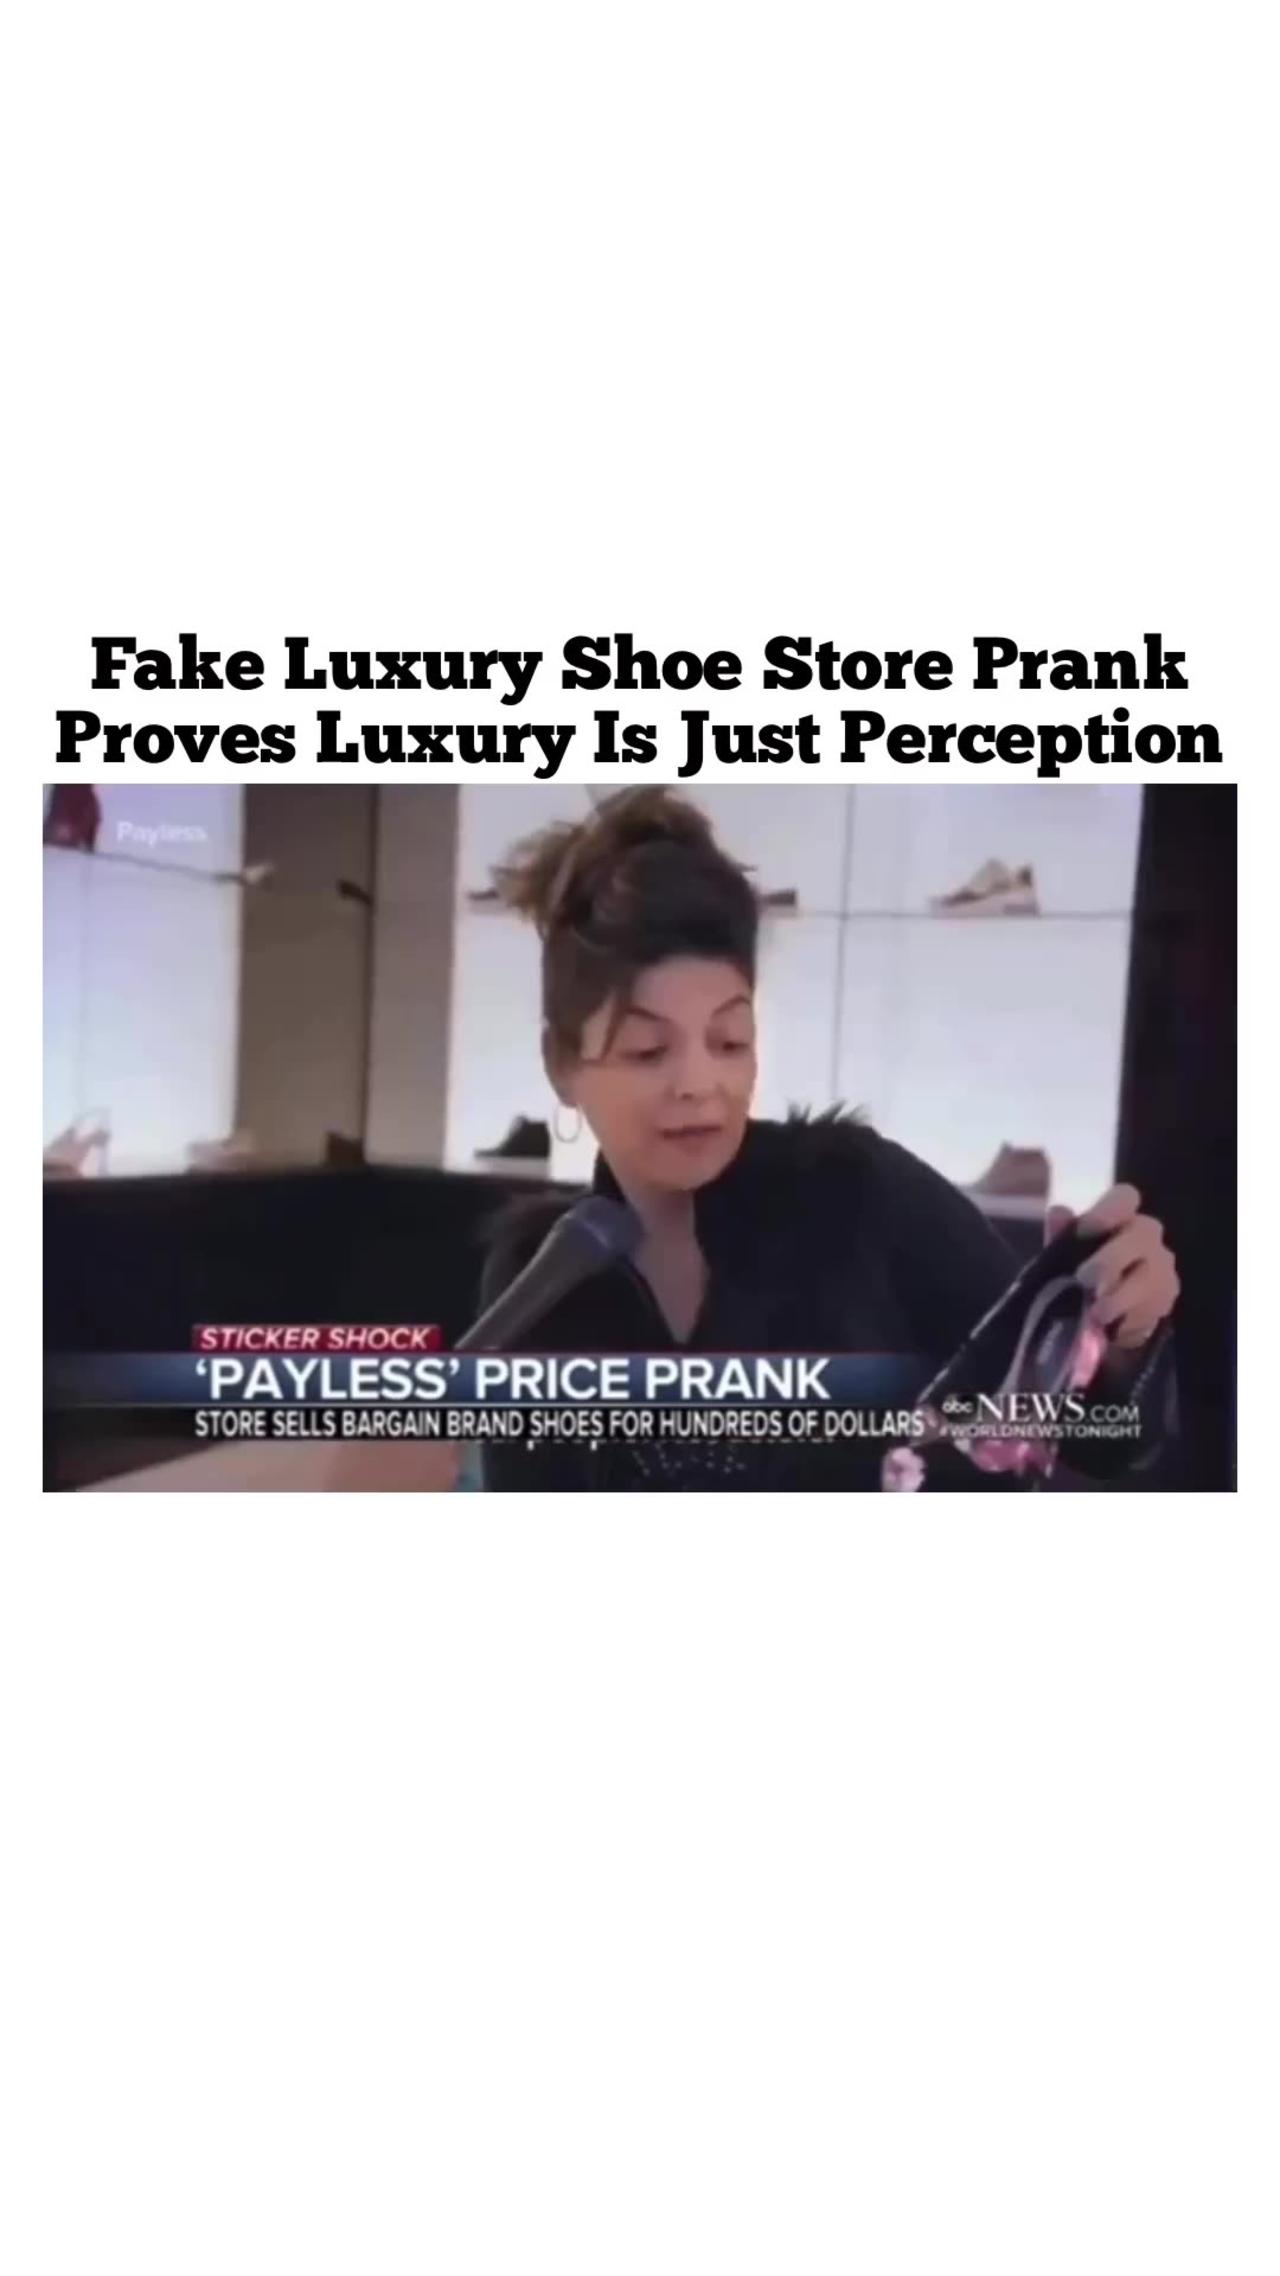 How do you get someone to pay $500 for a $35 pair of PayLess shoes?